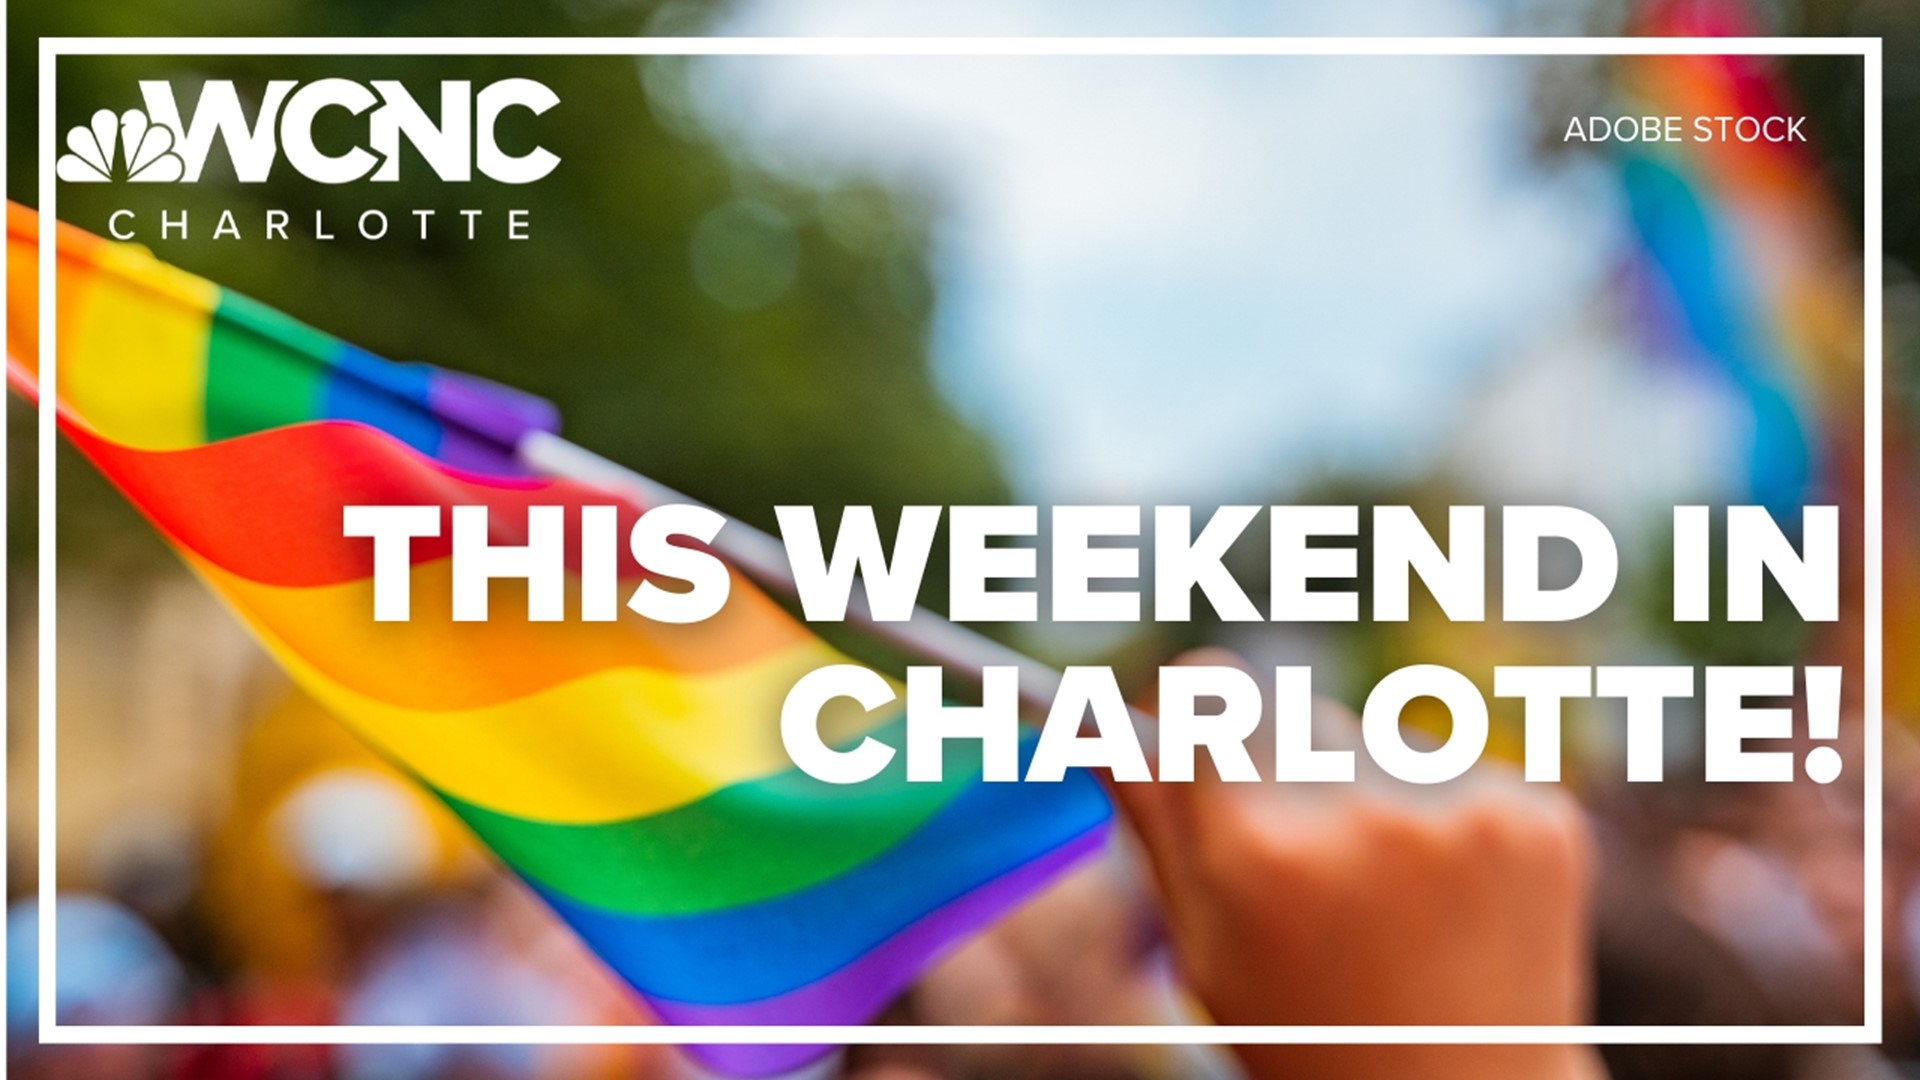 There are plenty of things to do this weekend in Charlotte. See what's happening!